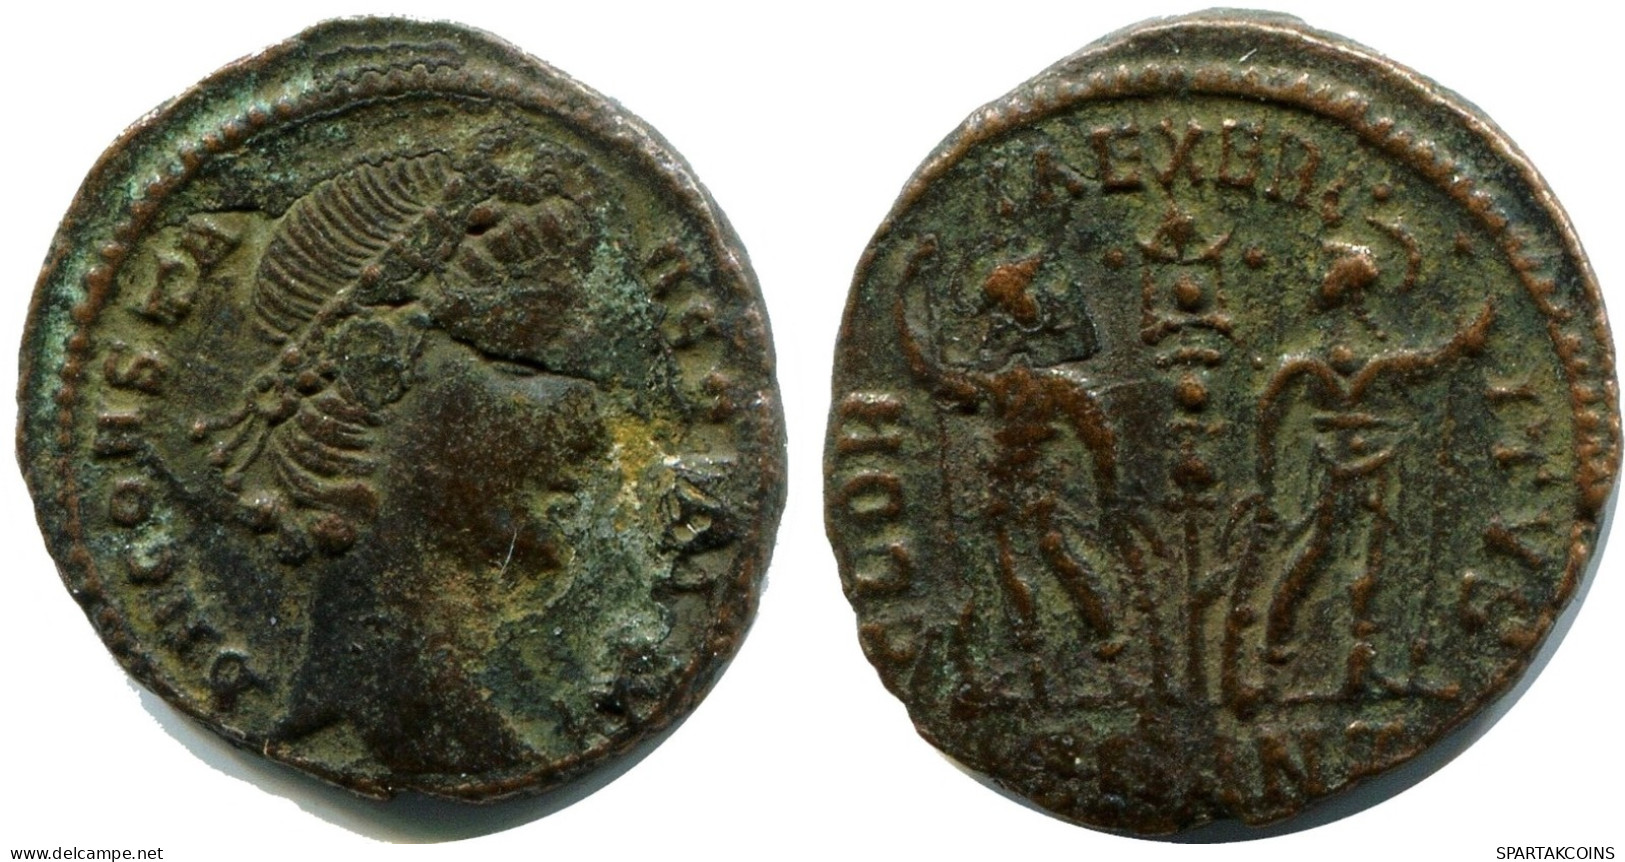 CONSTANS MINTED IN ANTIOCH FROM THE ROYAL ONTARIO MUSEUM #ANC11800.14.F.A - L'Empire Chrétien (307 à 363)